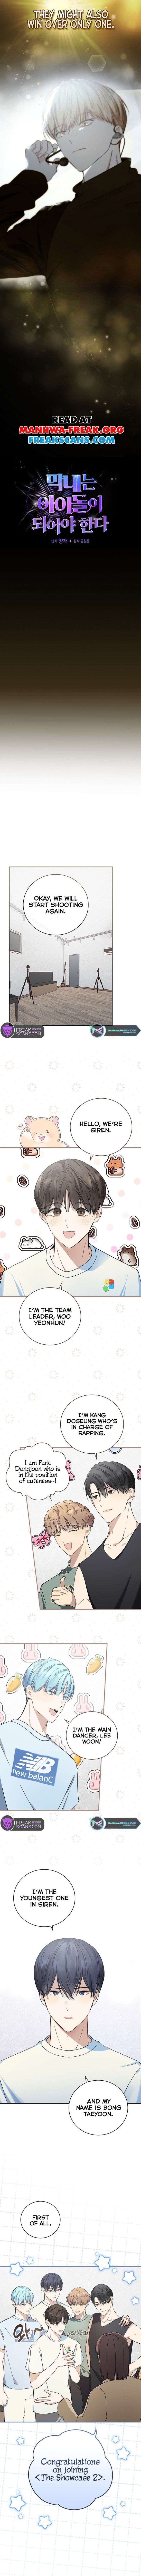 The Maknae Has to Be an Idol - chapter 8 - #3